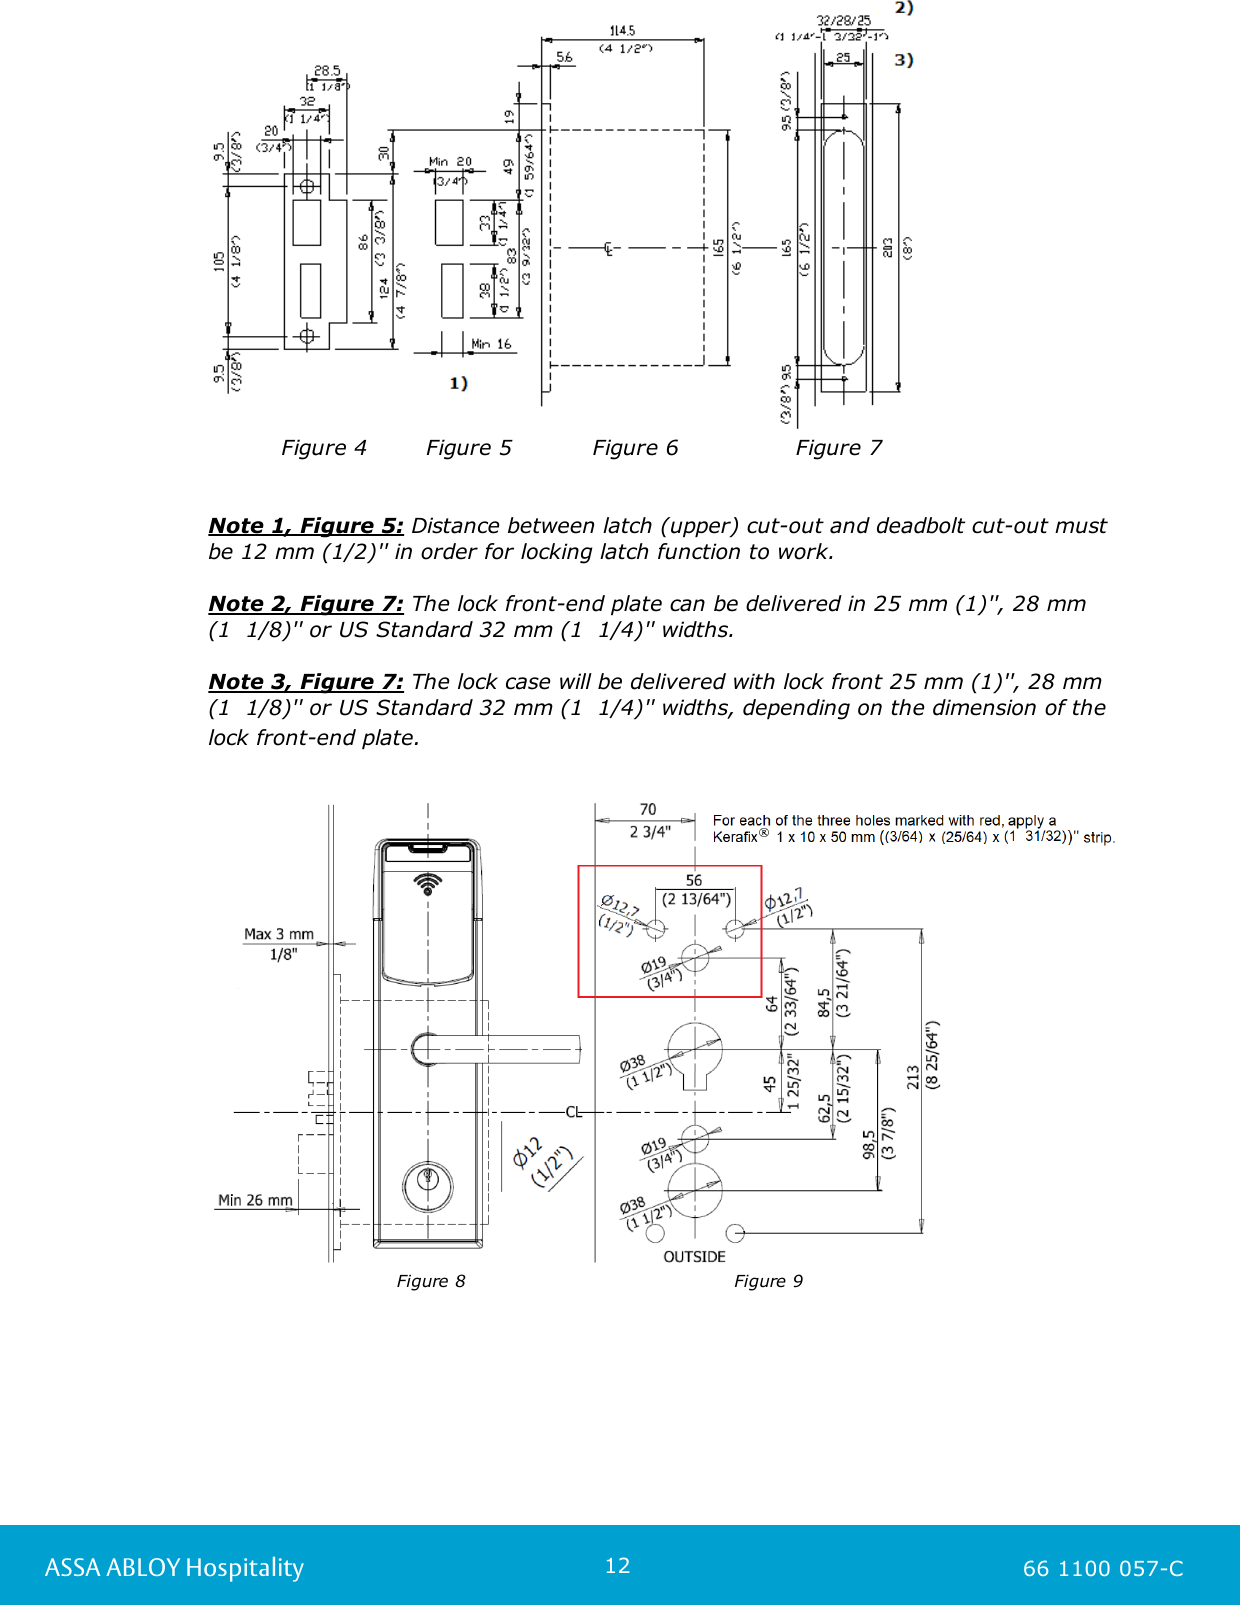 12ASSA ABLOY Hospitality 66 1100 057-C          Figure 4        Figure 5           Figure 6                Figure 7Note 1, Figure 5: Distance between latch (upper) cut-out and deadbolt cut-out mustbe 12 mm (1/2)&apos;&apos; in order for locking latch function to work. Note 2, Figure 7: The lock front-end plate can be delivered in 25 mm (1)&apos;&apos;, 28 mm (1  1/8)&apos;&apos; or US Standard 32 mm (1  1/4)&apos;&apos; widths. Note 3, Figure 7: The lock case will be delivered with lock front 25 mm (1)&apos;&apos;, 28 mm(1  1/8)&apos;&apos; or US Standard 32 mm (1  1/4)&apos;&apos; widths, depending on the dimension of thelock front-end plate.                           Figure 8                                           Figure 9  